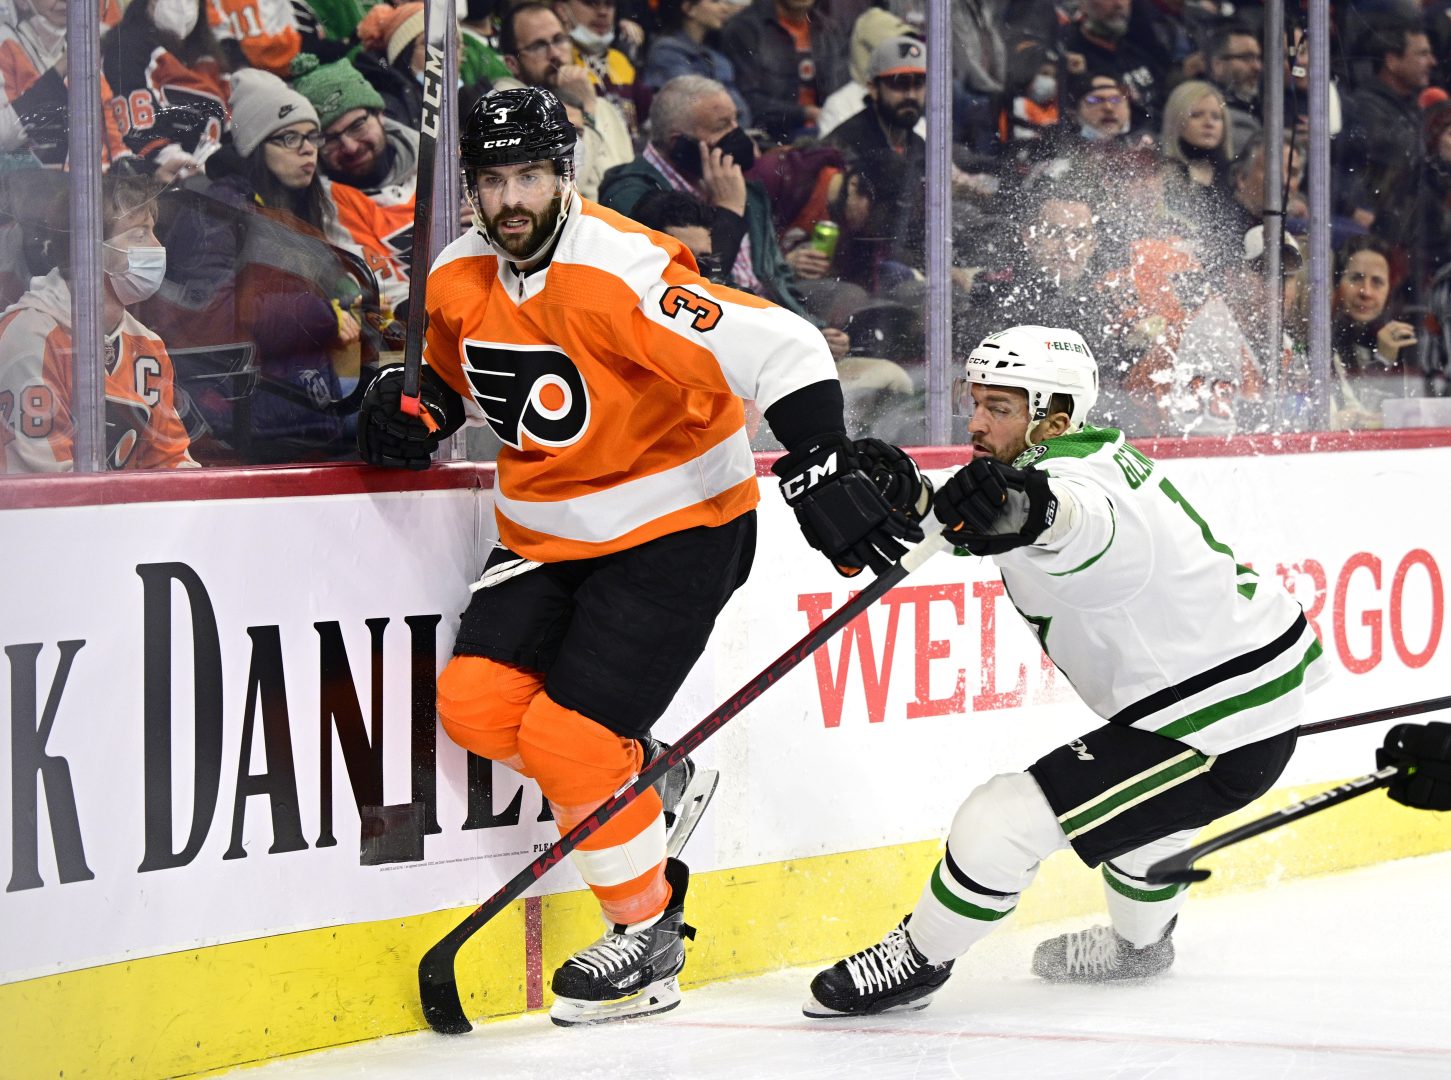 Philadelphia Flyers' Keith Yandle, left, and Dallas Stars' Luke Glendening battle along the boards during the first period of an NHL hockey game, Monday, Jan. 24, 2022, in Philadelphia. Yandle tied the NHL record for consecutive games played with 964 on Monday. 